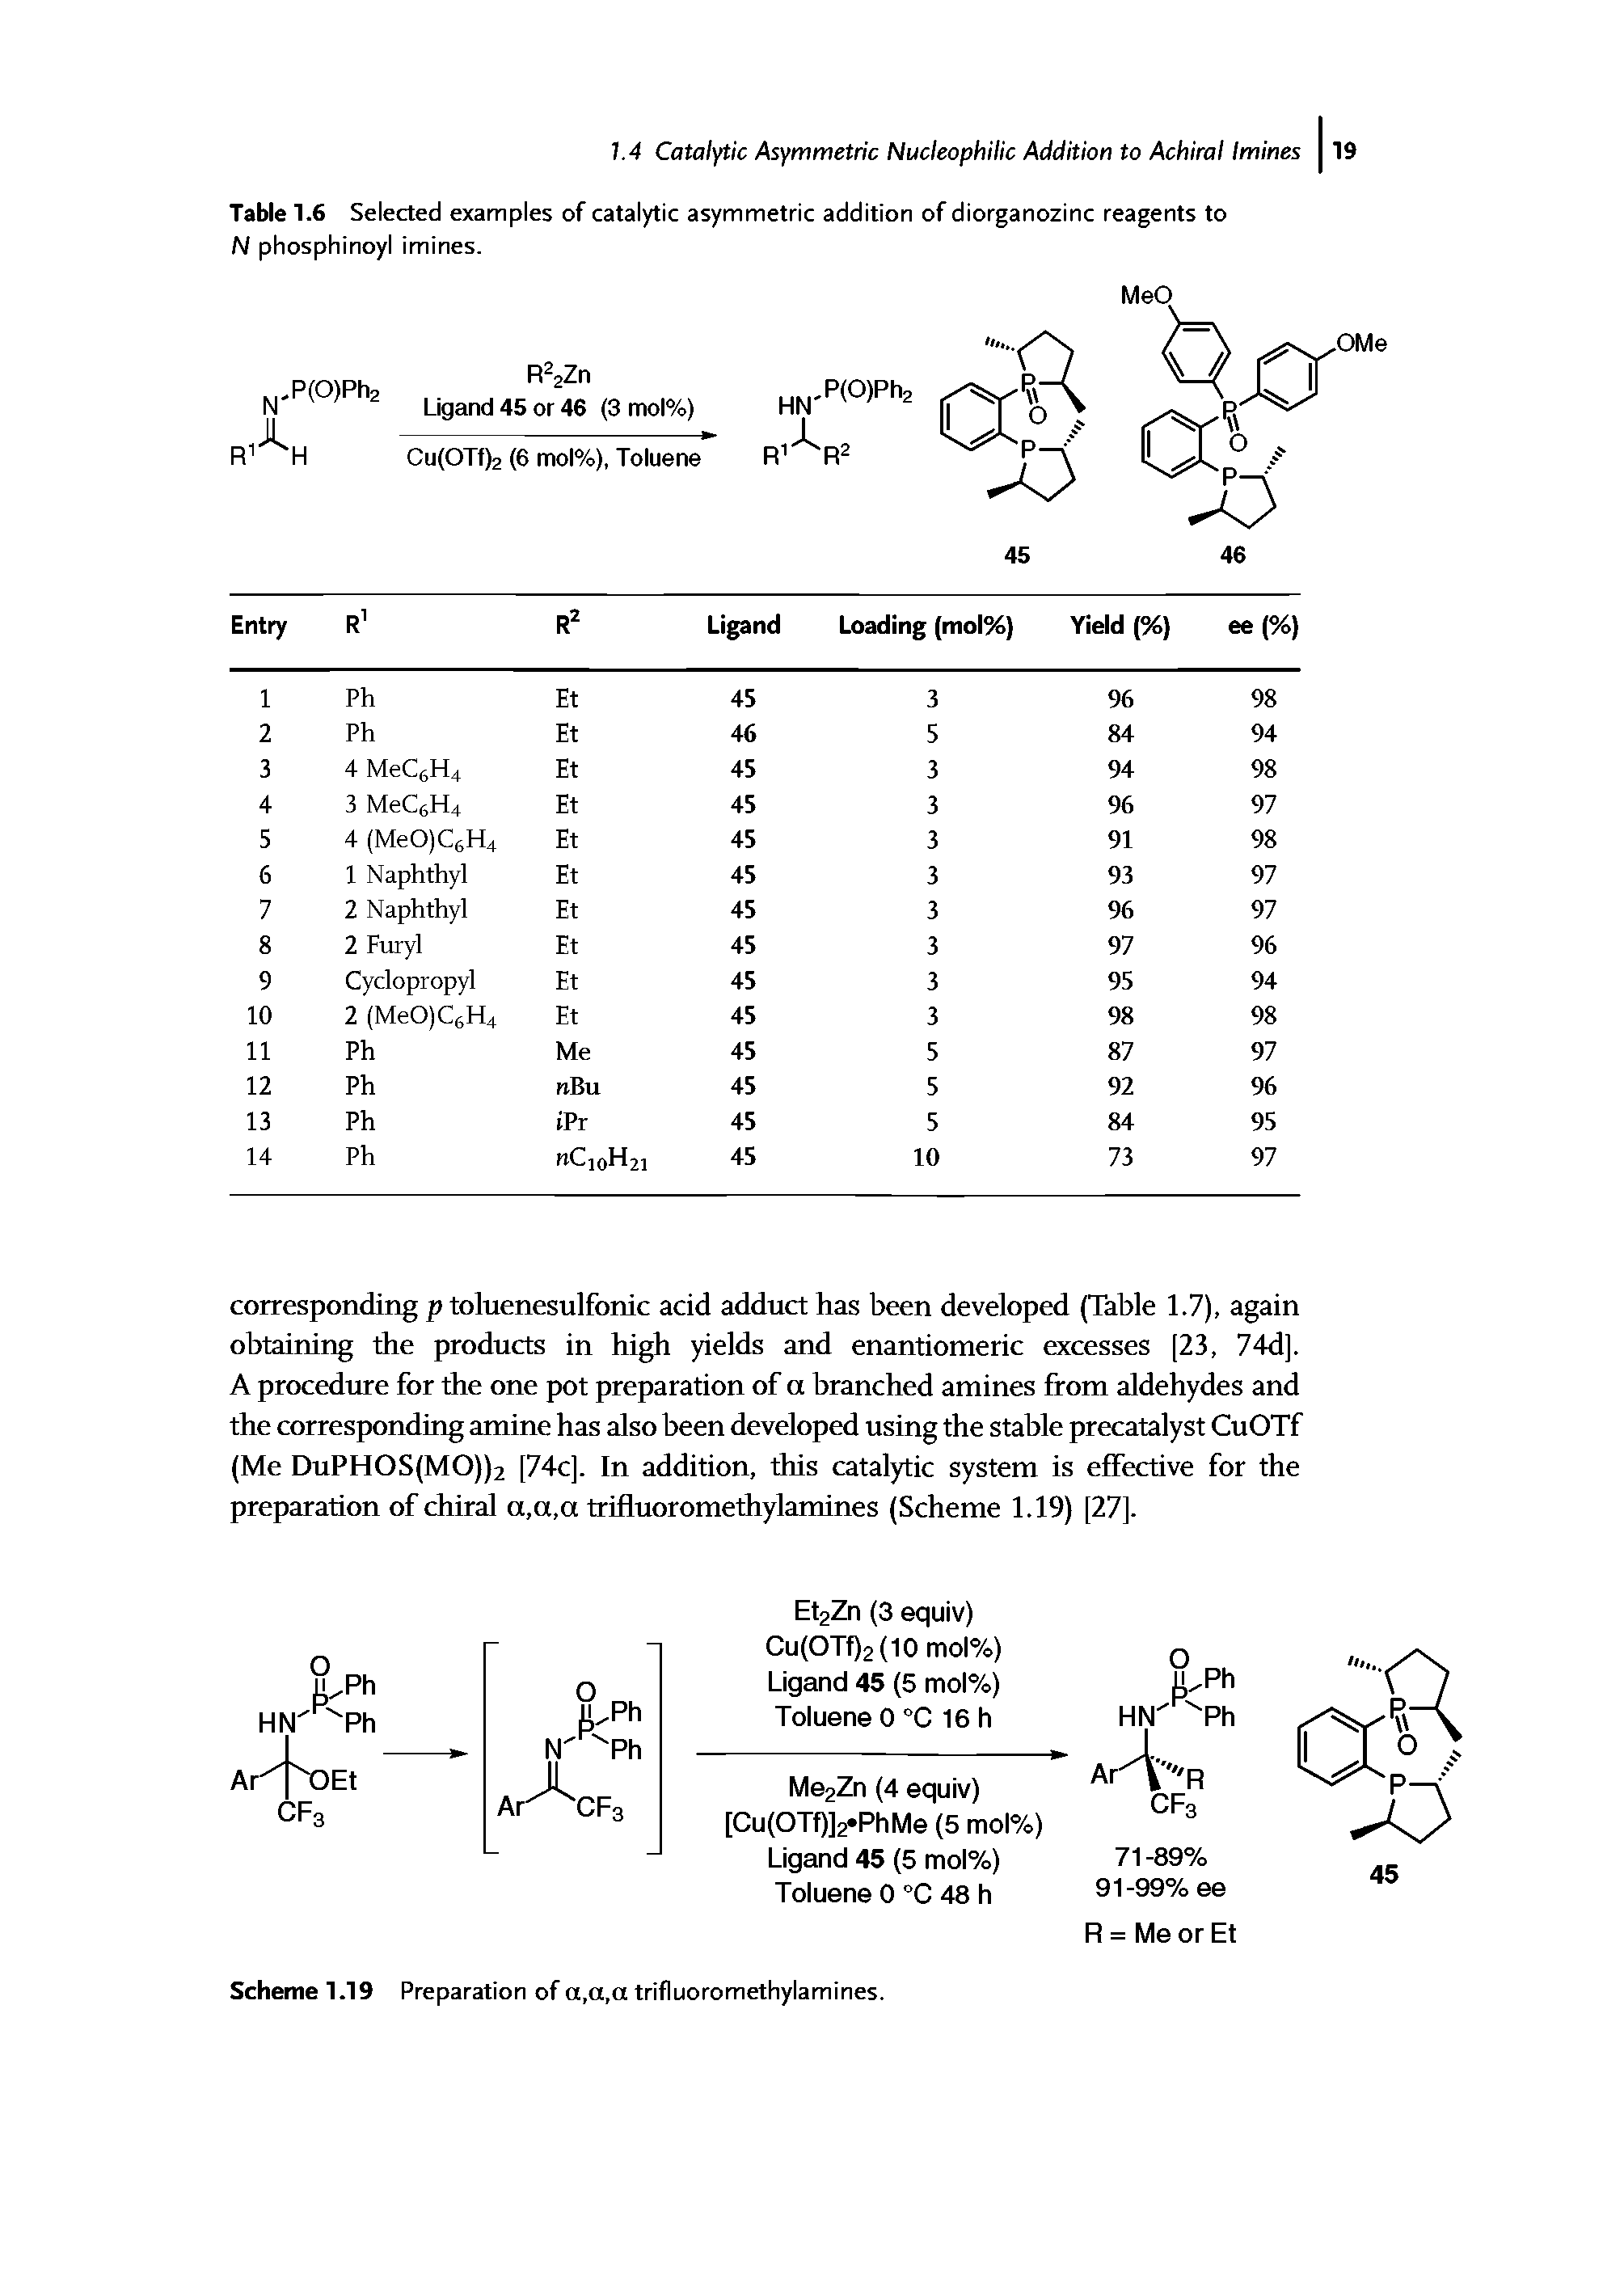 Table 1.6 Selected examples of catalytic asymmetric addition of diorganozinc reagents to N phosphinoyl imines.